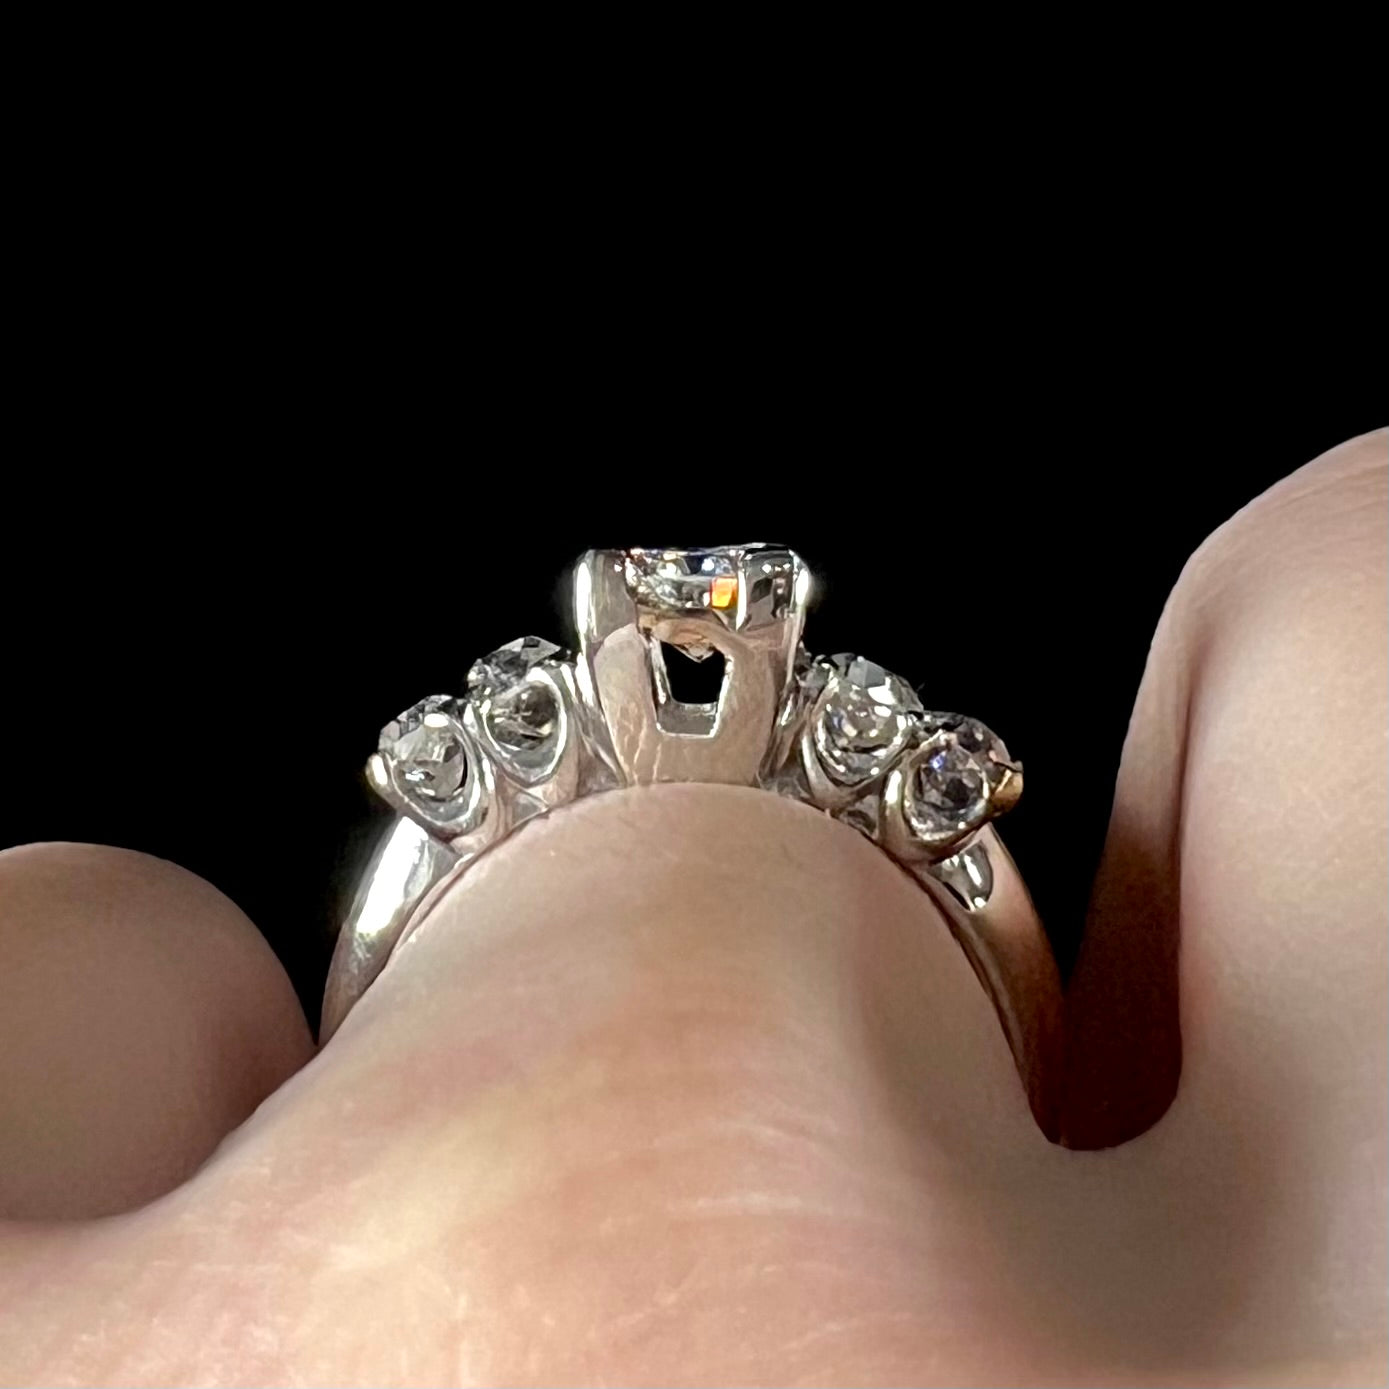 A ladies' 1800's antique white gold diamond ring.  The center stone is an Early American Cut diamond, and the accent stones are Old Mine Cut diamonds.